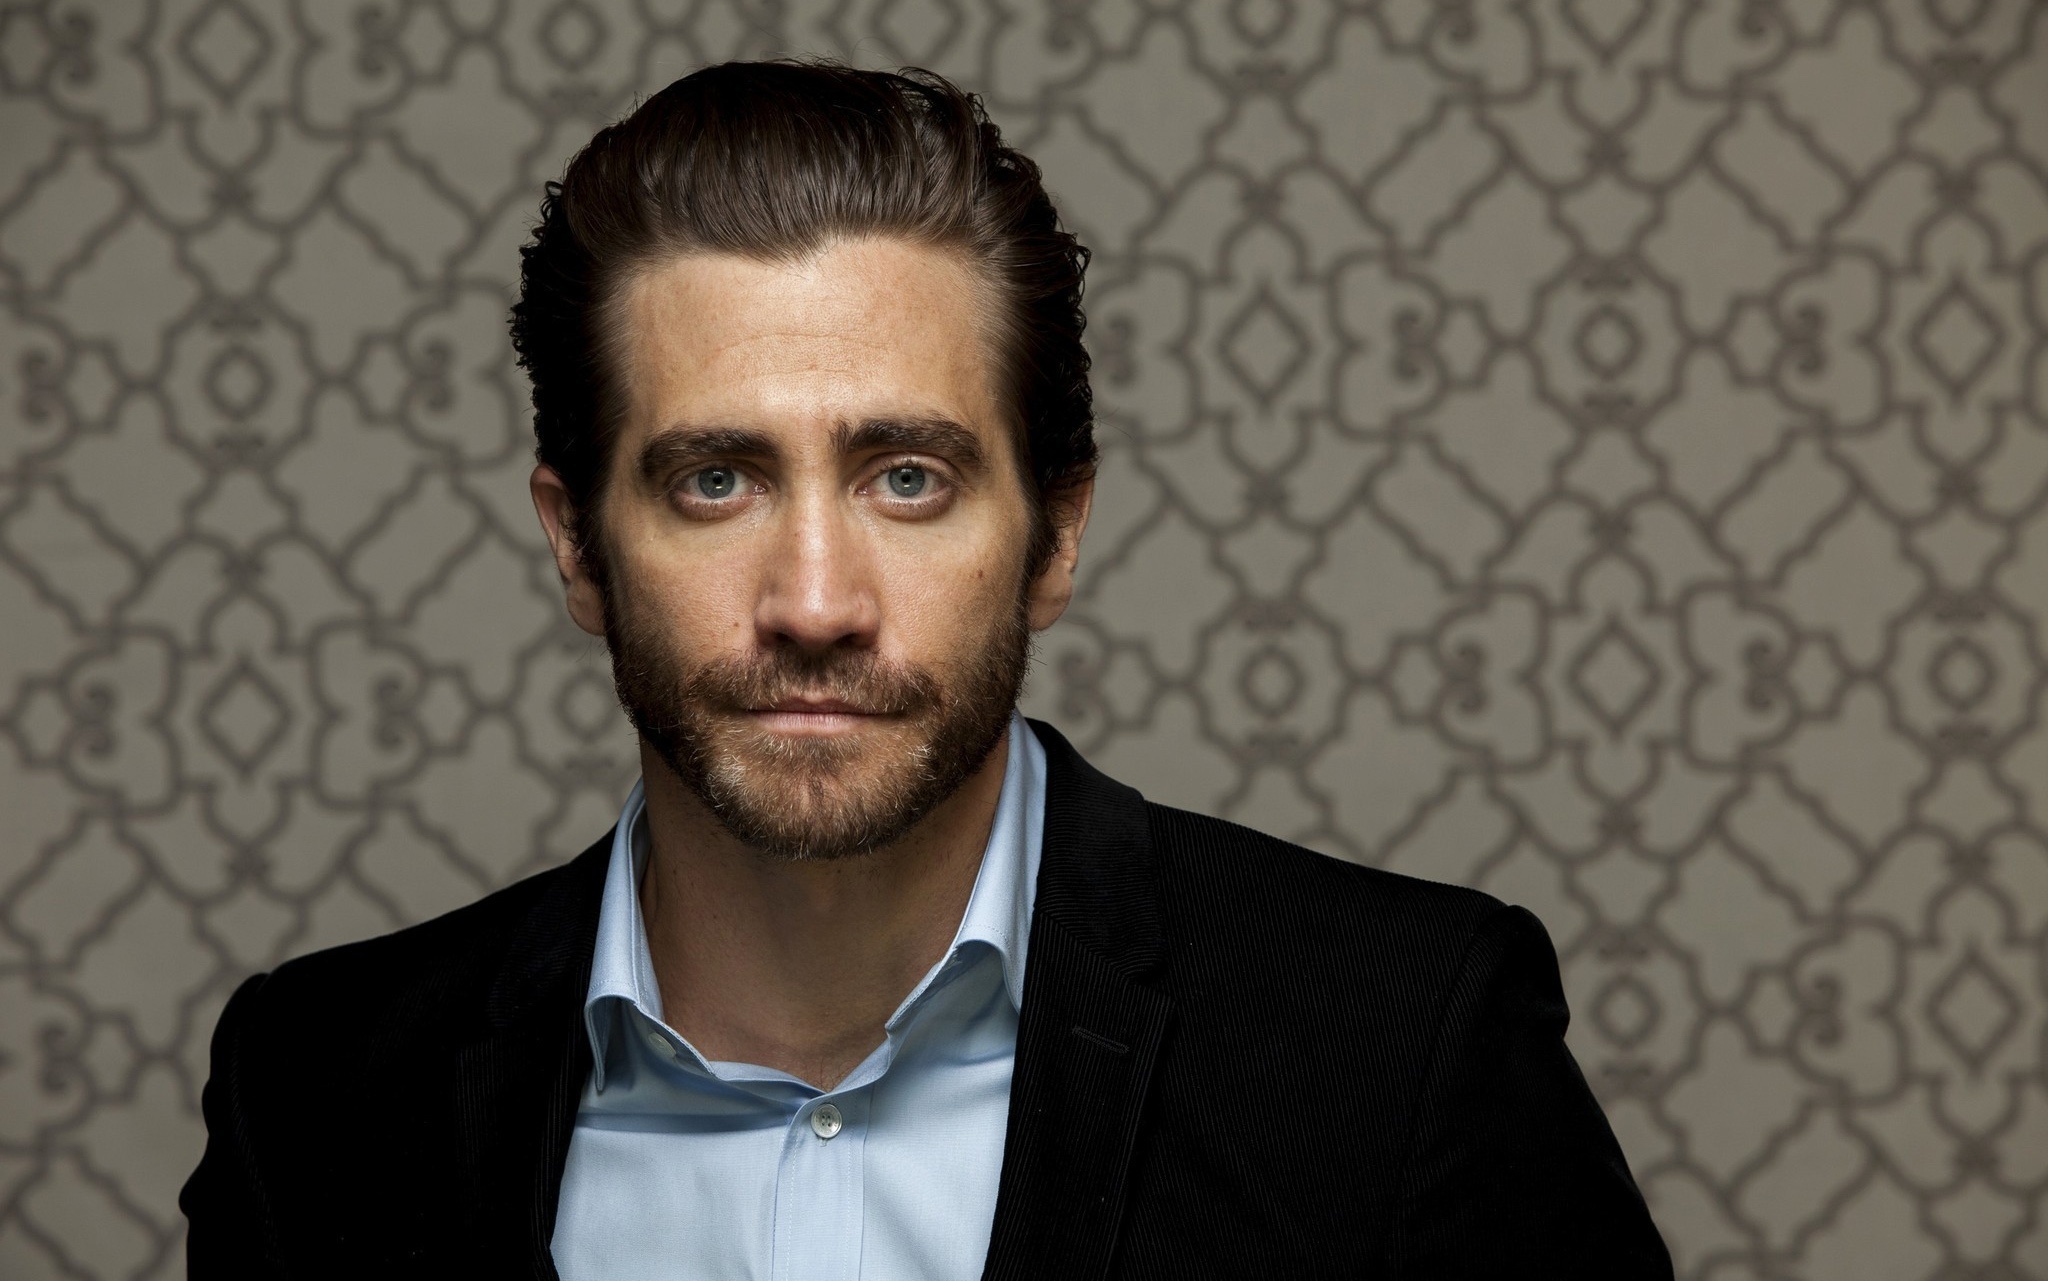 Jake Gyllenhaal: Played Adam Bell and Anthony Claire in a 2013 psychological drama film, Enemy. 2050x1290 HD Wallpaper.